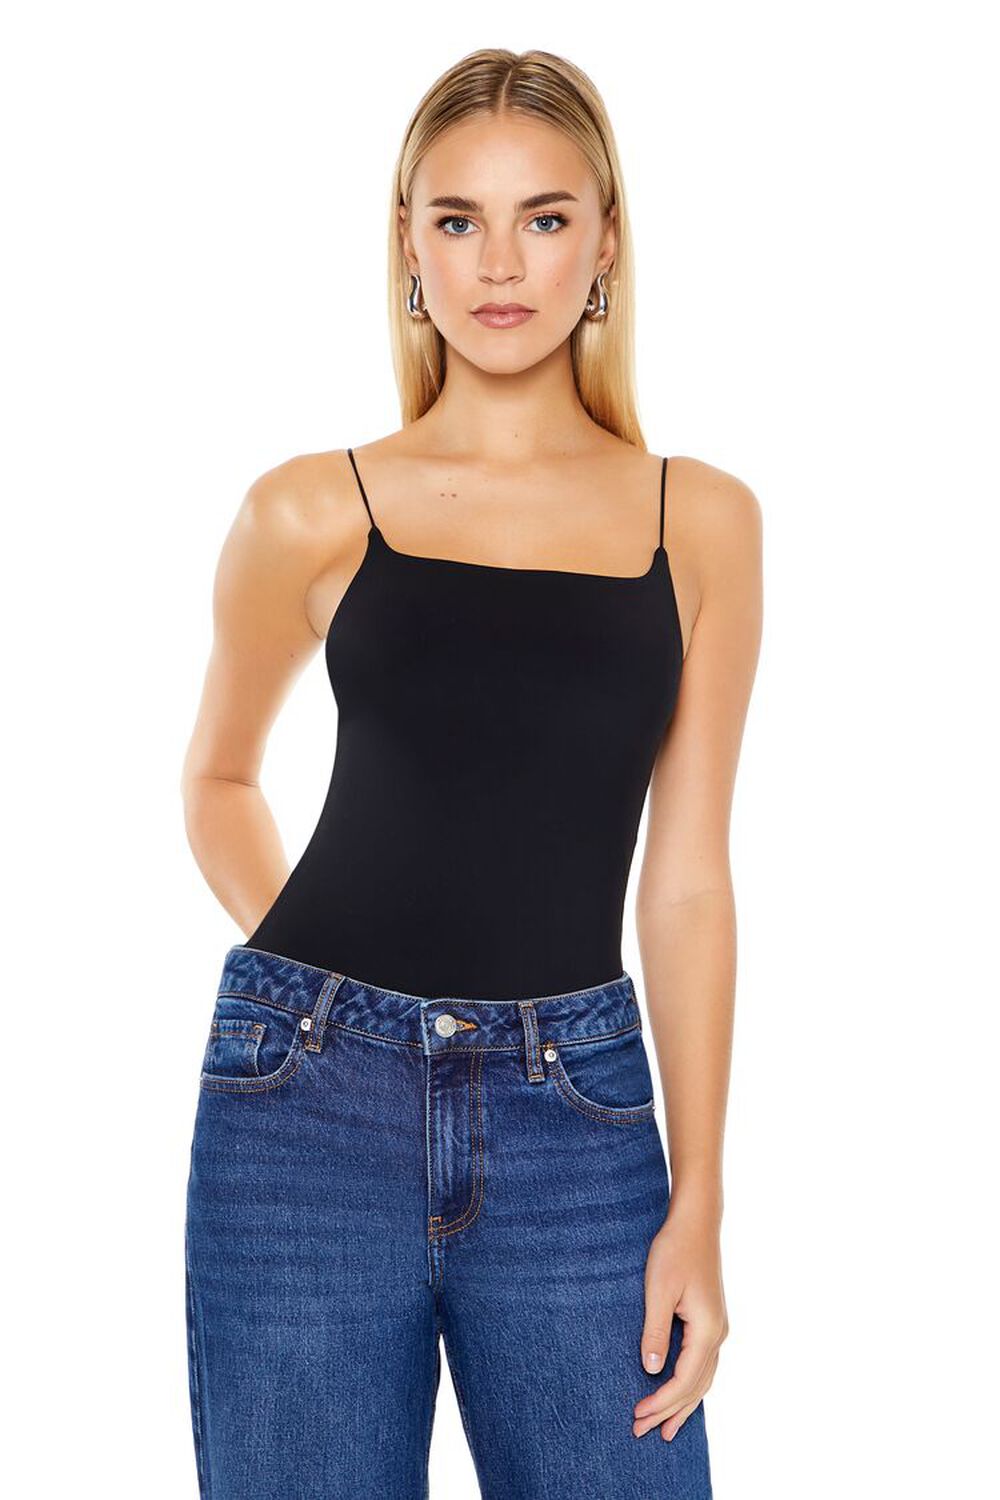 The Fullest Answer to What is a Camisole